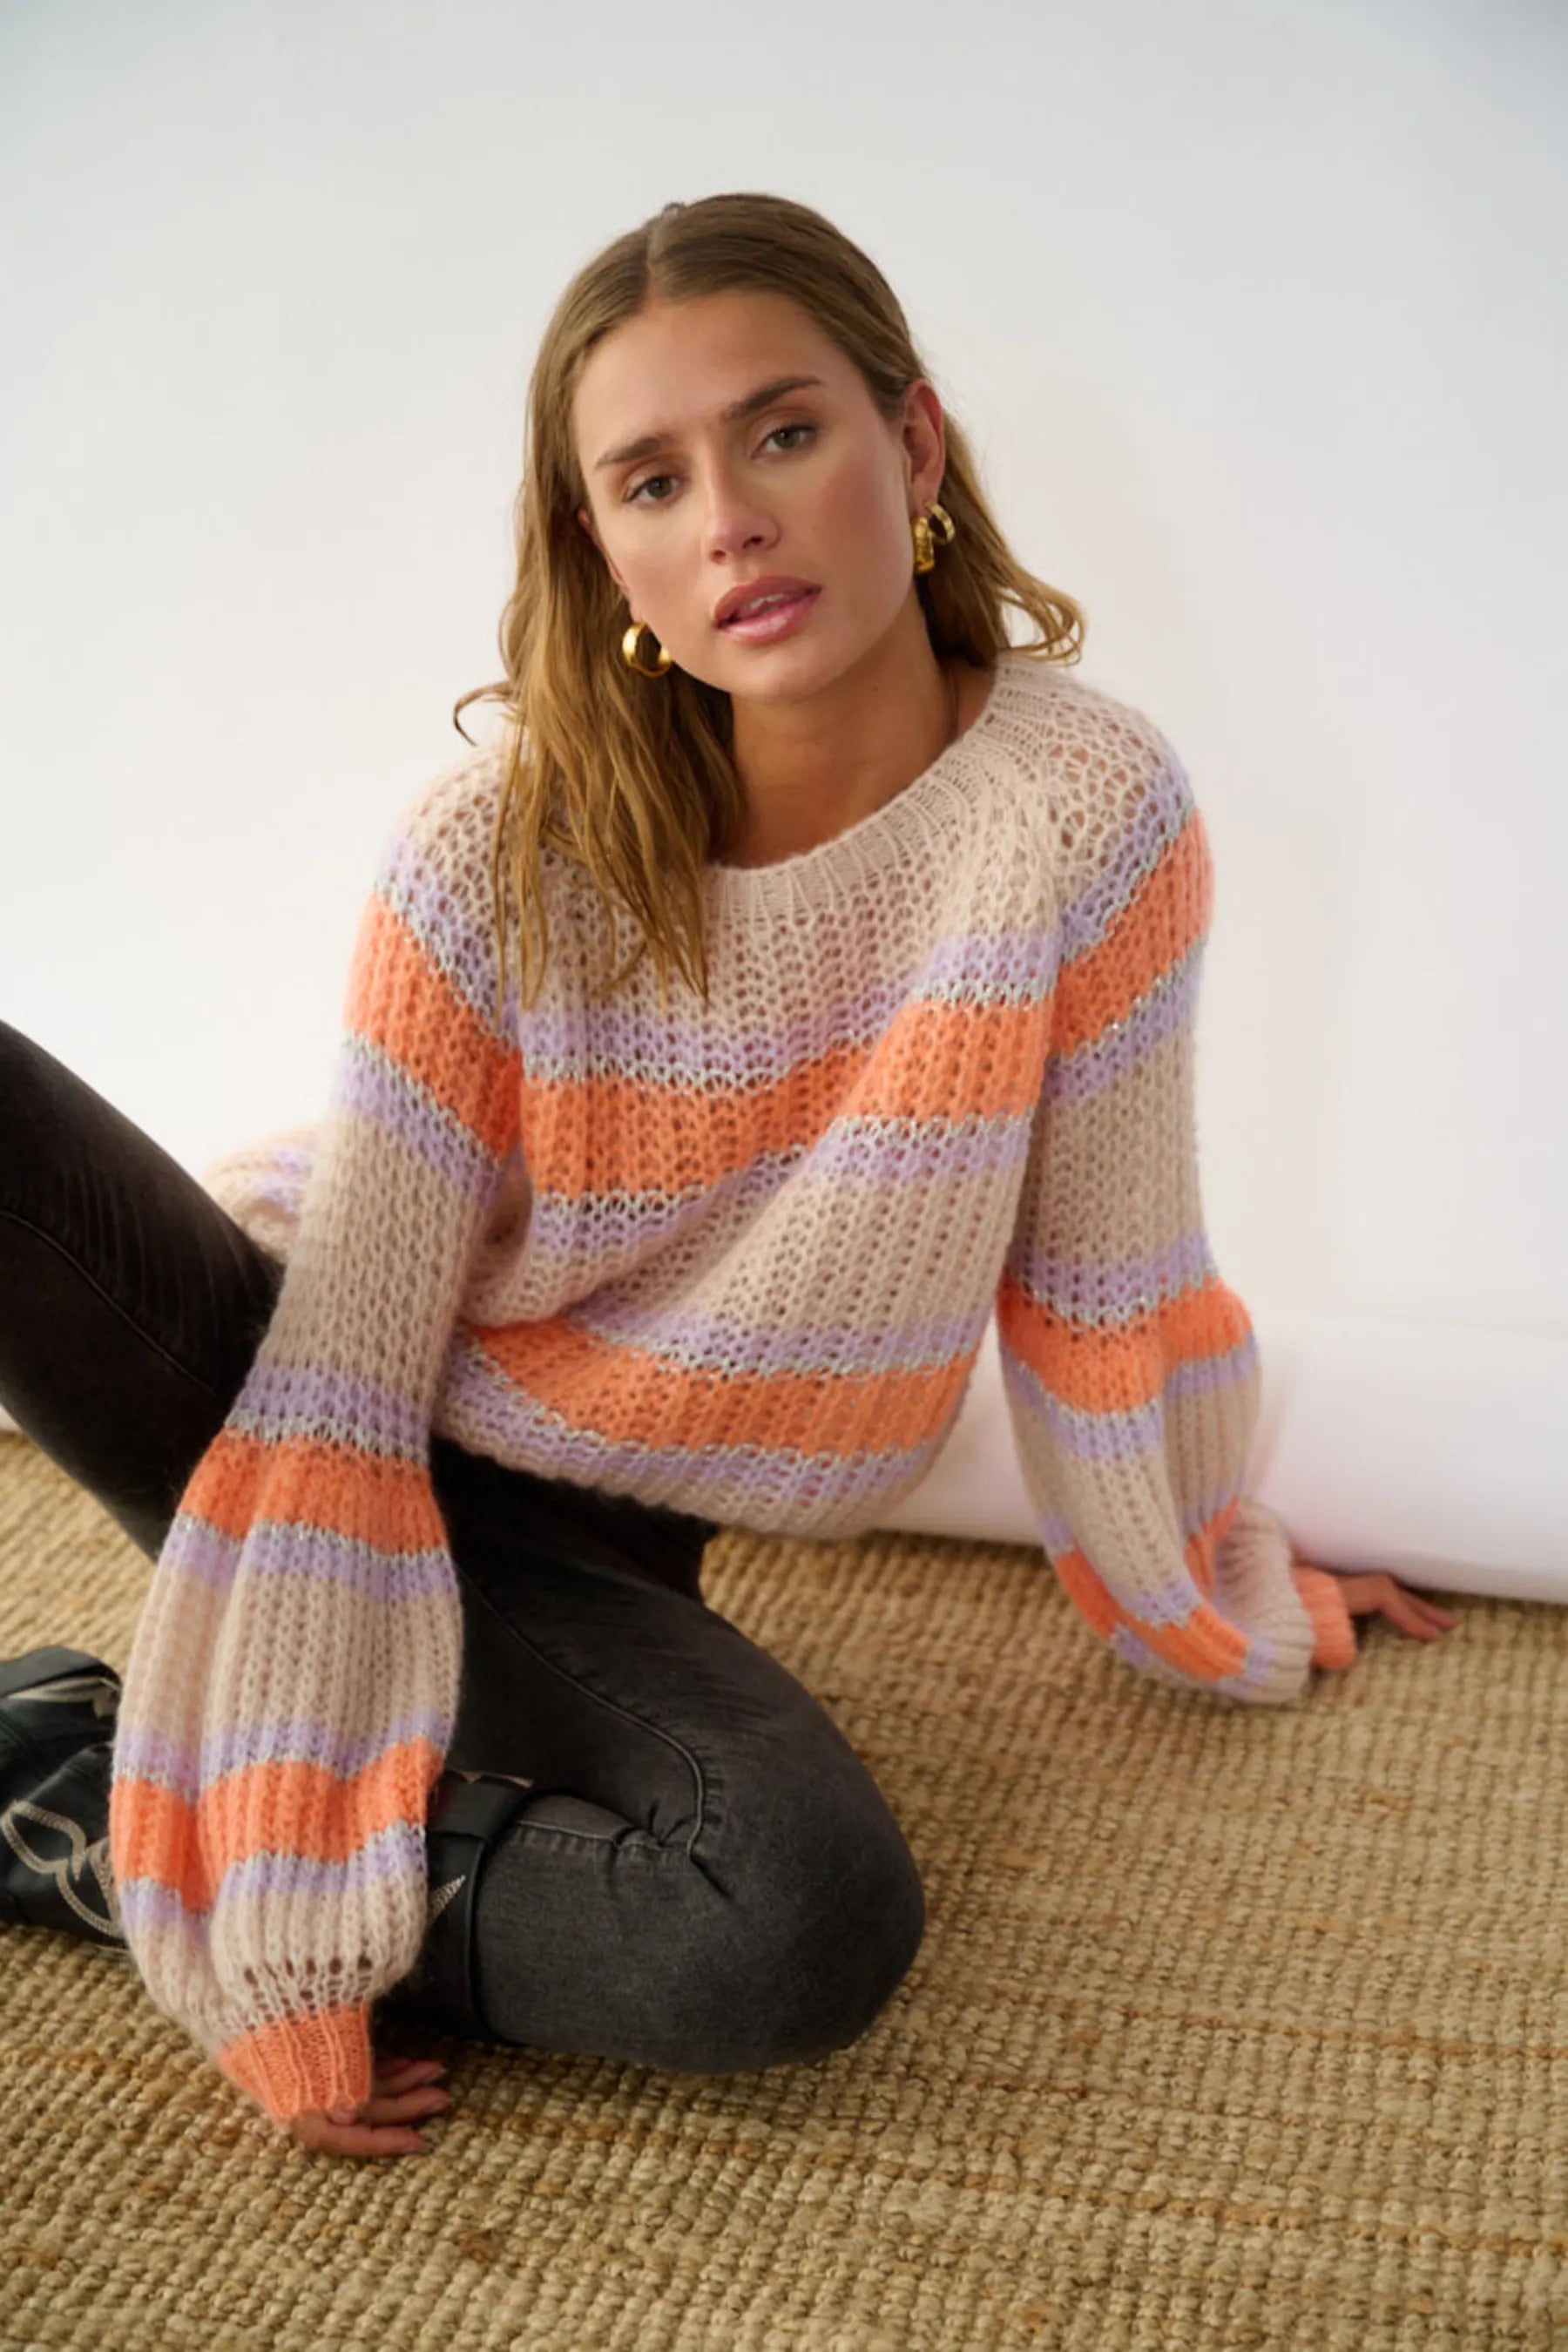 Pacific Knit Sweater - Apricot/Lavender Mix